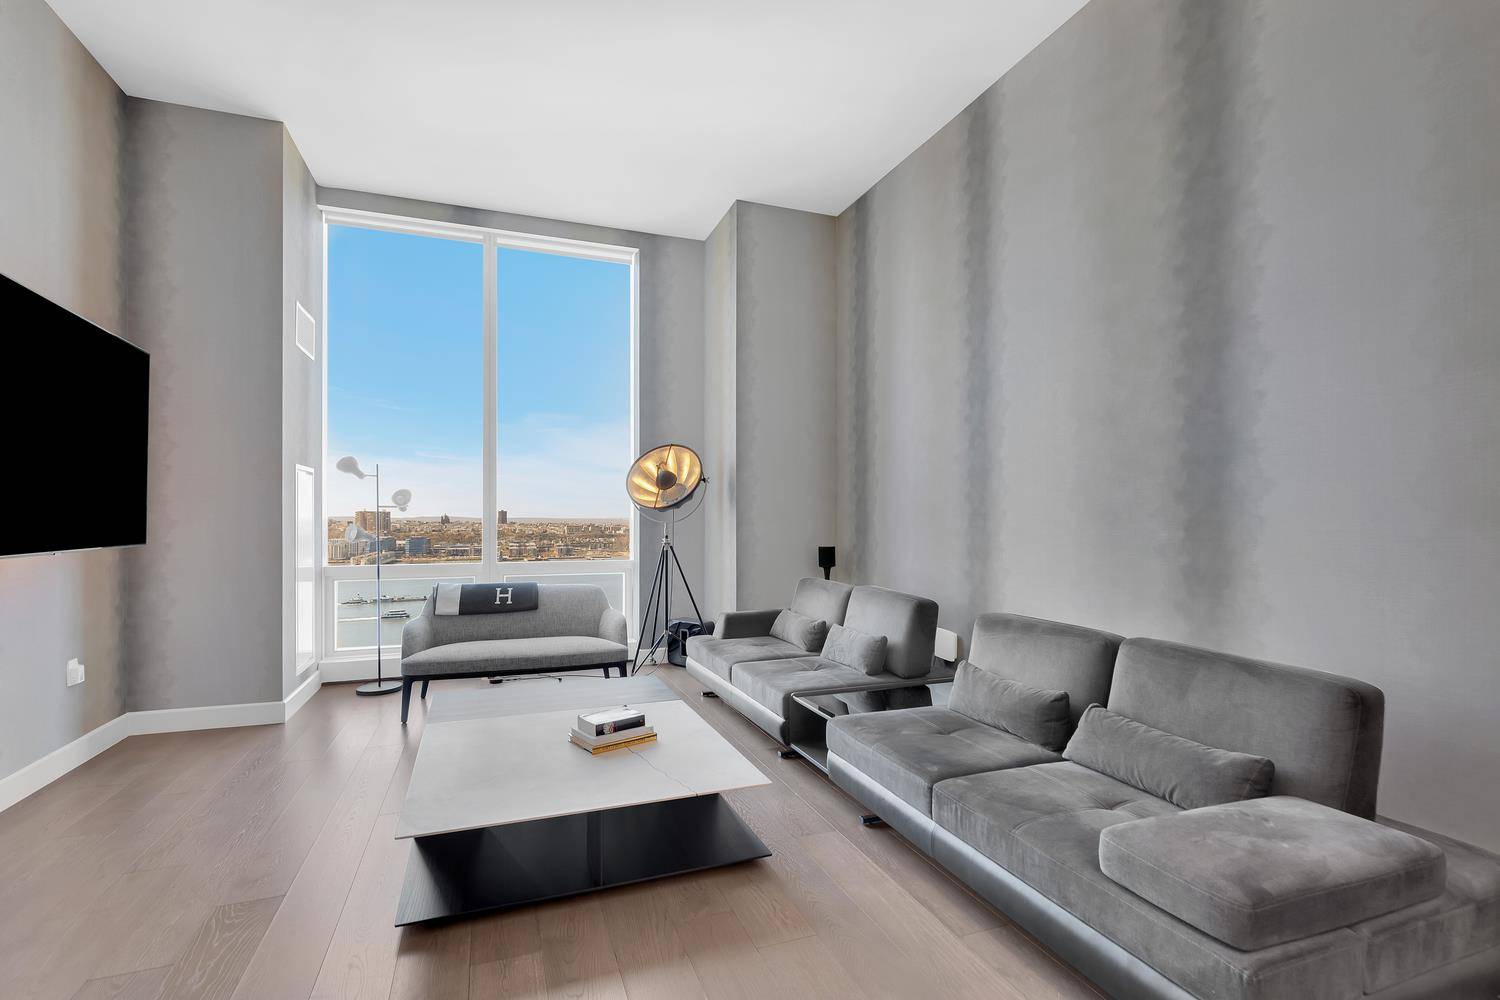 Featuring sophisticated design and incredible amenities, this property in New York's most exciting area is perfect for living, investment or as a Pied a Terre.